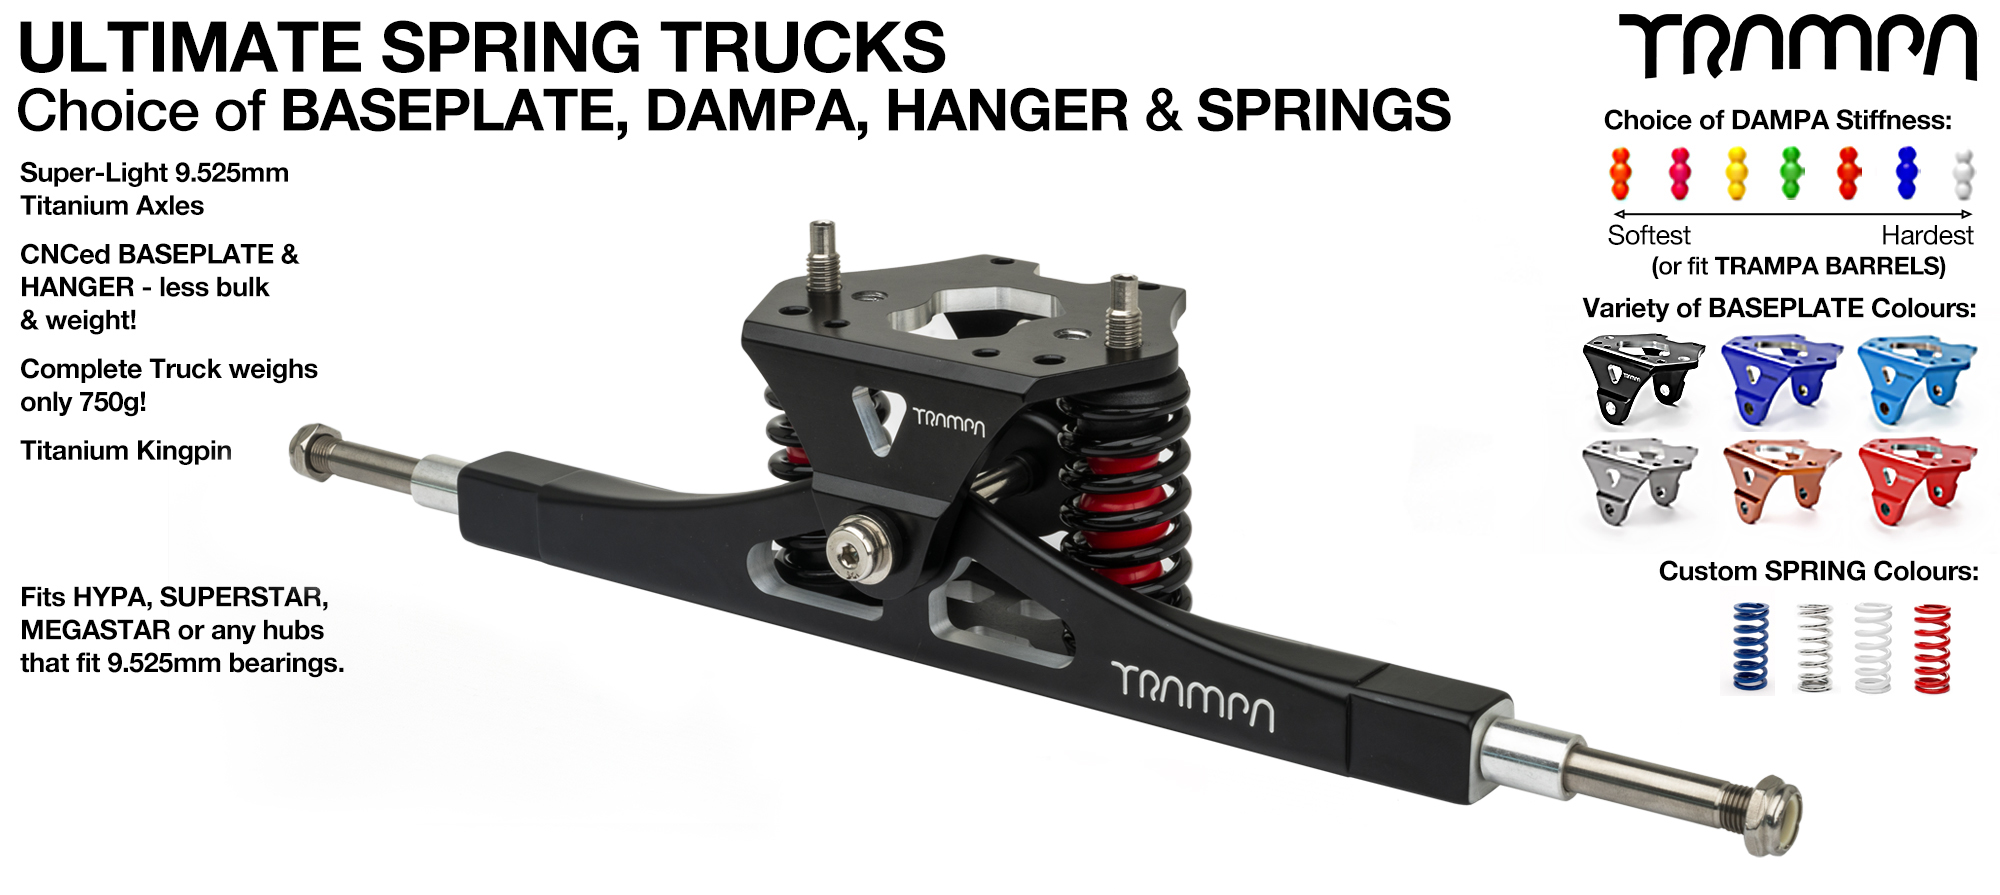 Precision CNC ULTIMATE ATB TRUCK with CNC Motor Mount fixing points & TRAMPA Baseplate, TITANIUM Axles & Kingpin